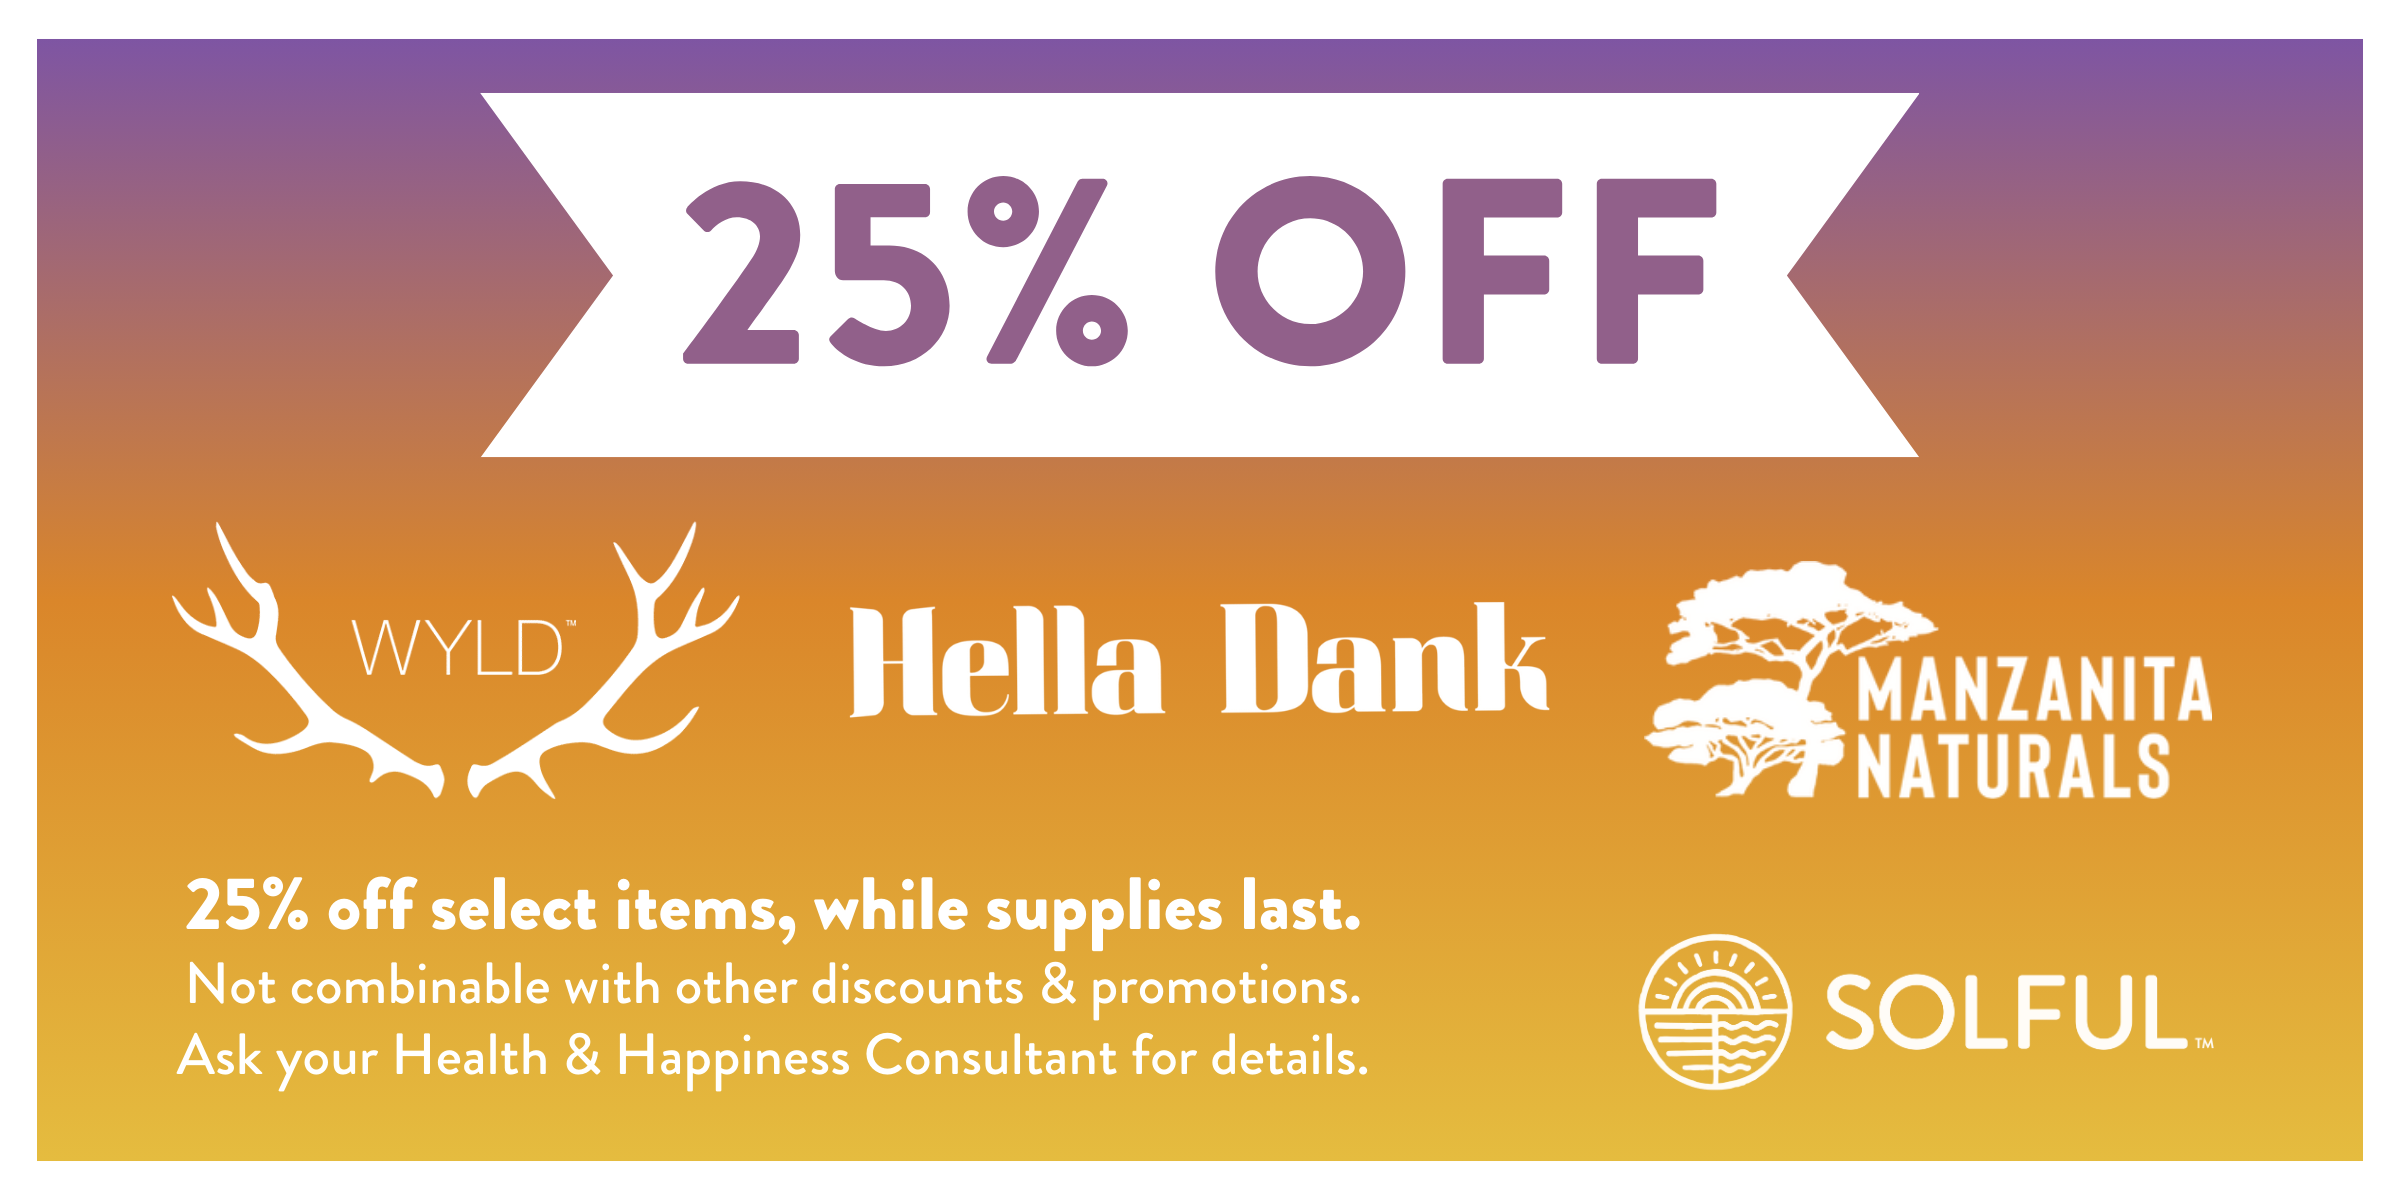 25% off Wyld, Hella Dank, and Manzanita Naturals. 25% off select items, while supplies last. Not combinable with other discounts and promotions. Ask your Health and Happiness Consultant for details.